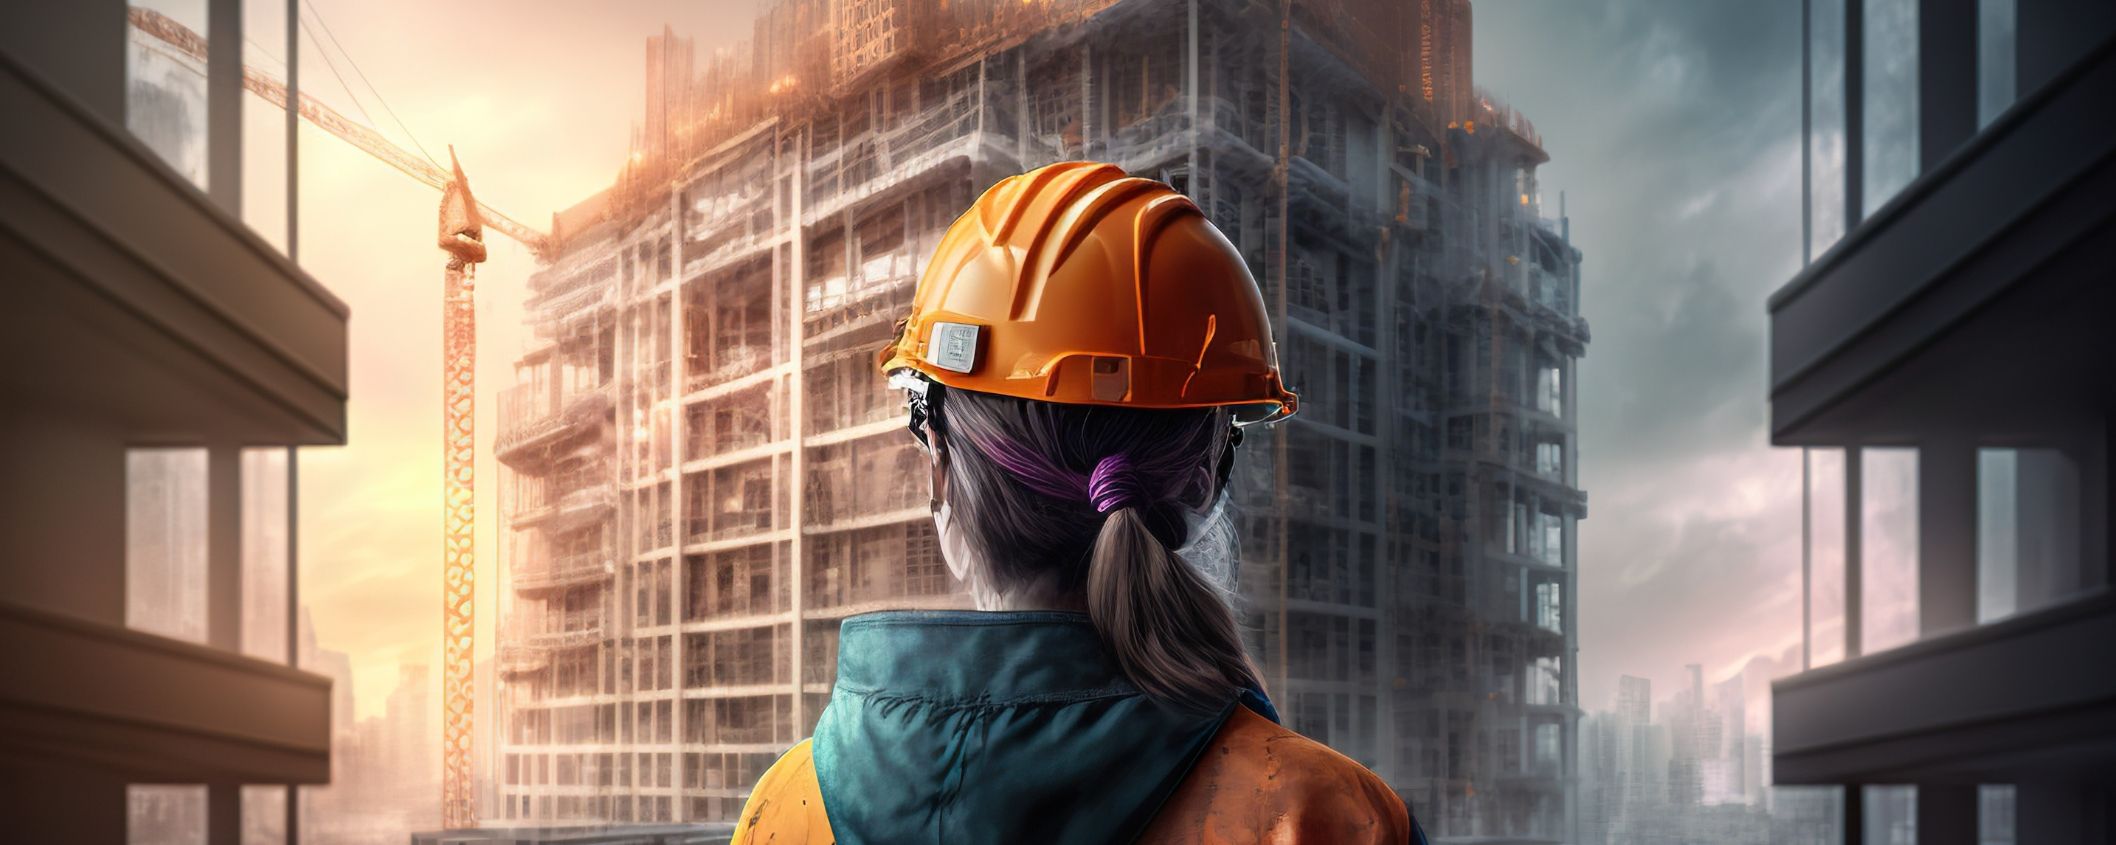 Women in construction: the fight against inequality